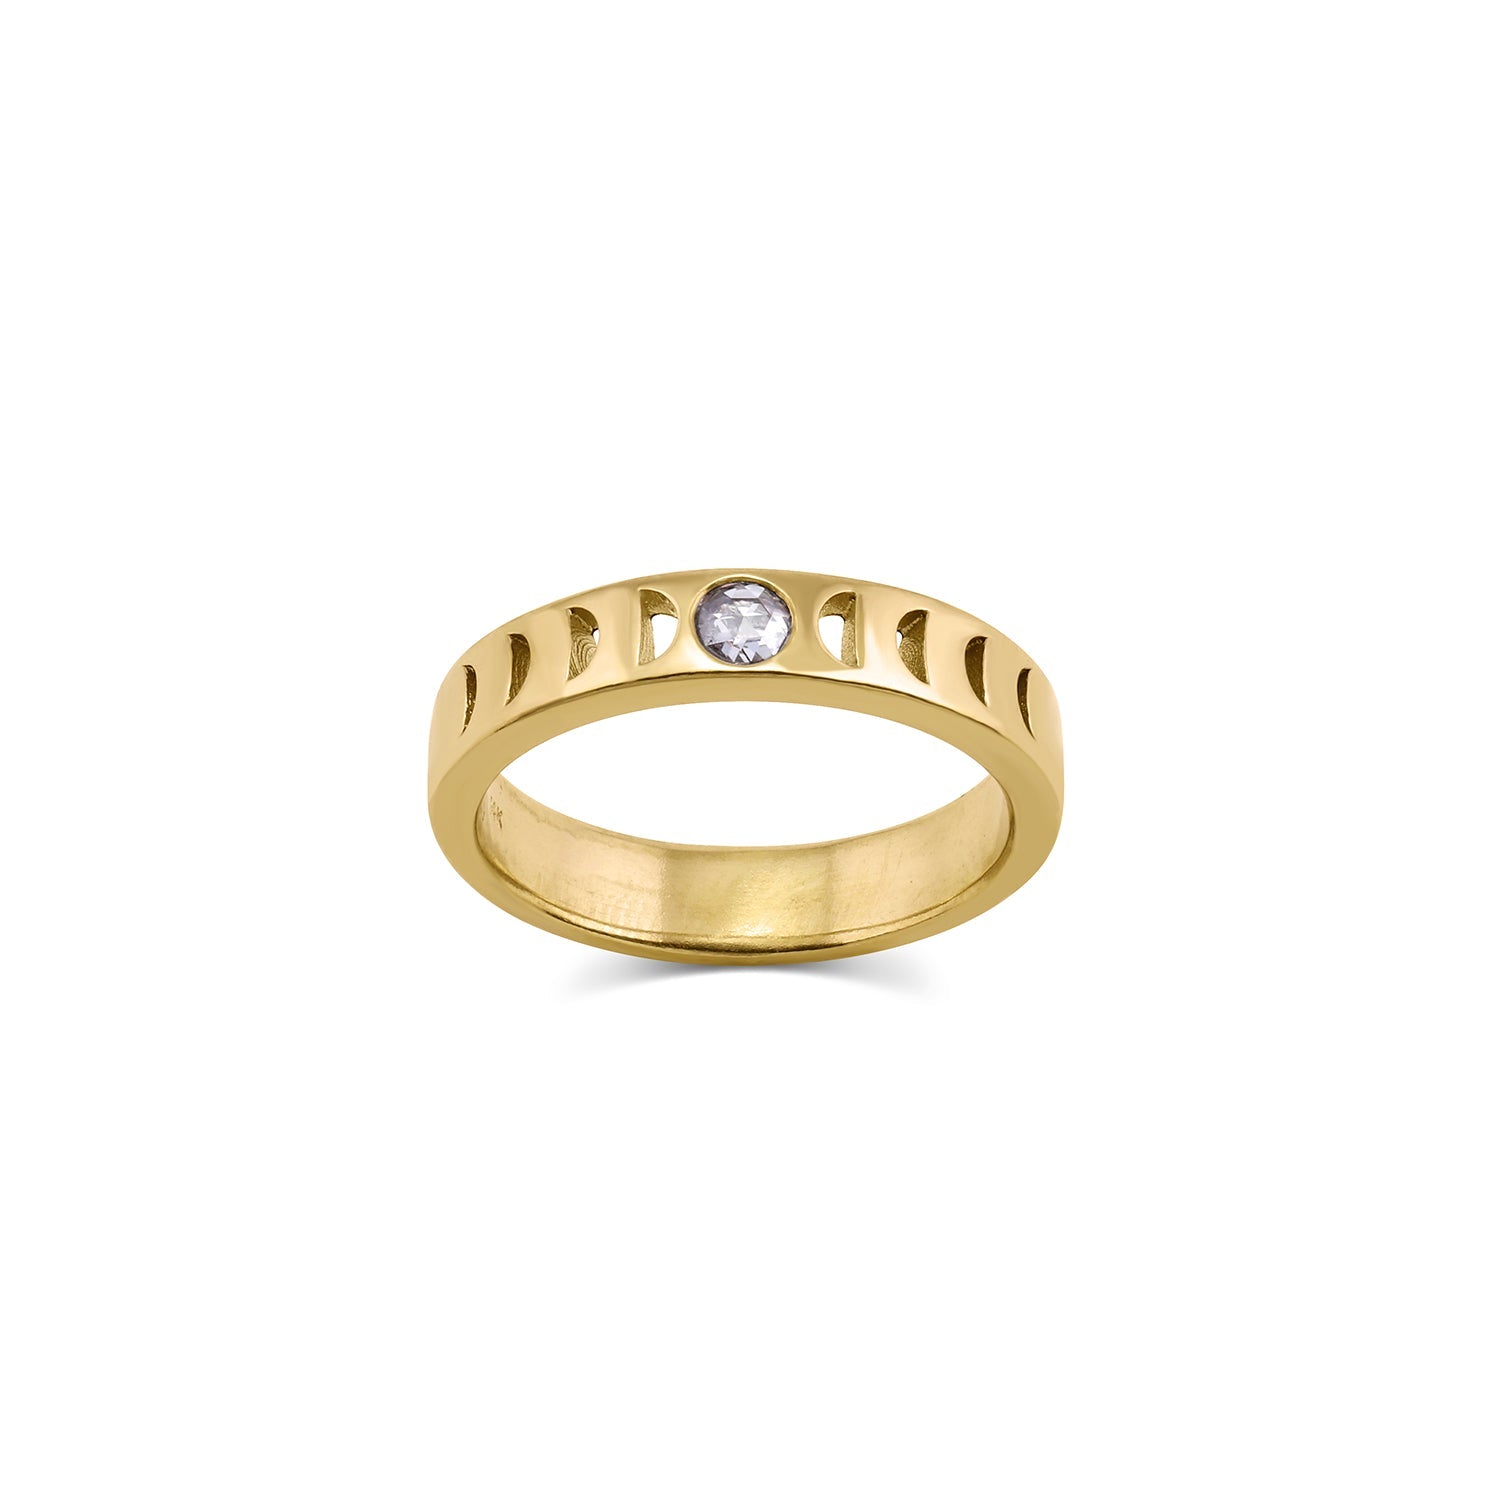 Moon Phase Rings moon phase rings > stacking rings > wedding bands > gender neutral bands > rose cut diamond ring > promise rings >lunar phase ring > moon ring > phases of the moon ring white rose cut diamond / 4 Moon Phase Ring | 4mm wide | gemstones